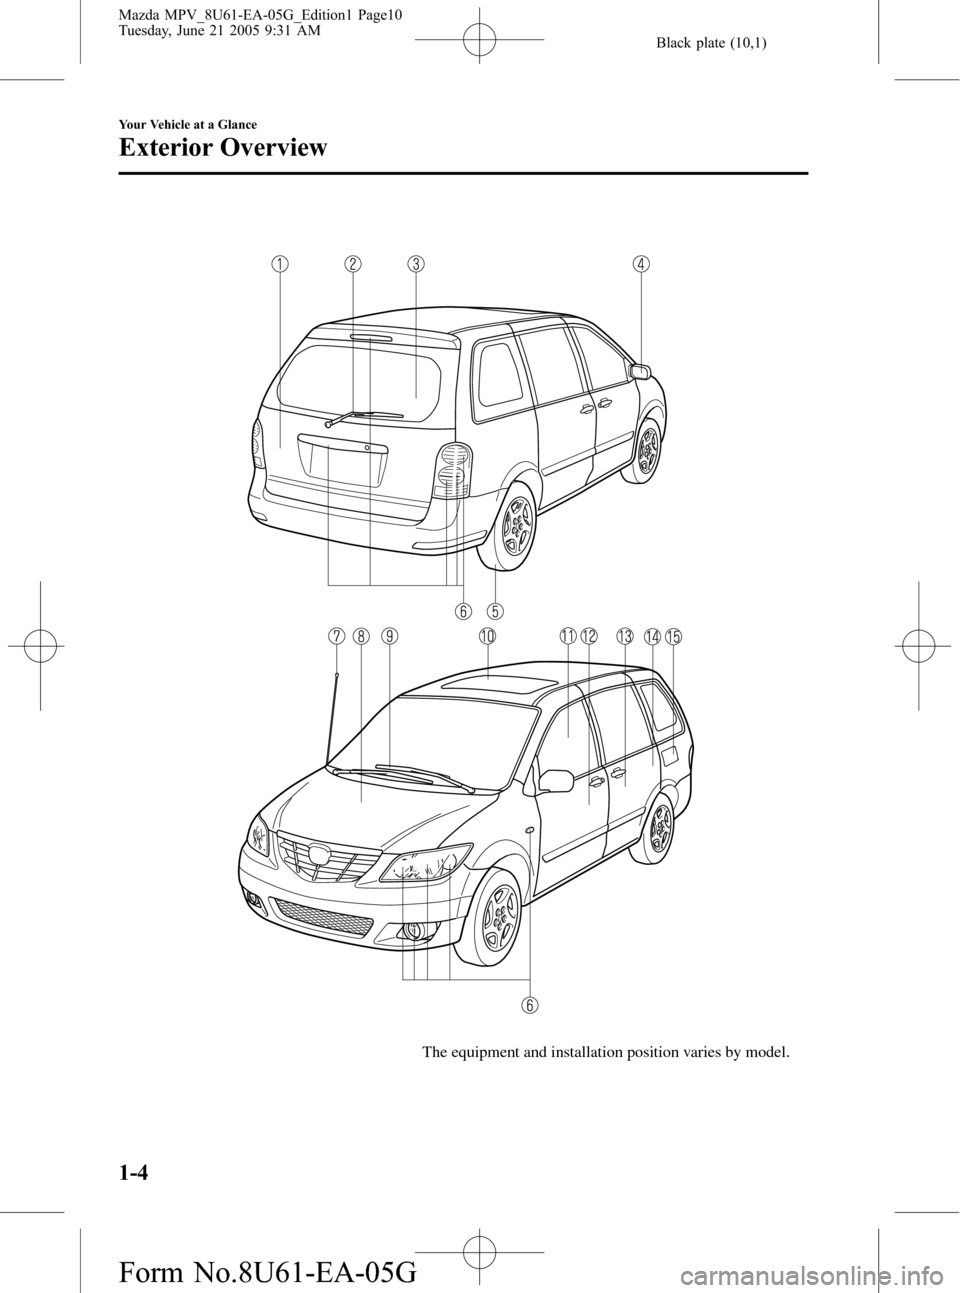 MAZDA MODEL MPV 2006  Owners Manual (in English) Black plate (10,1)
The equipment and installation position varies by model.
1-4
Your Vehicle at a Glance
Exterior Overview
Mazda MPV_8U61-EA-05G_Edition1 Page10
Tuesday, June 21 2005 9:31 AM
Form No.8